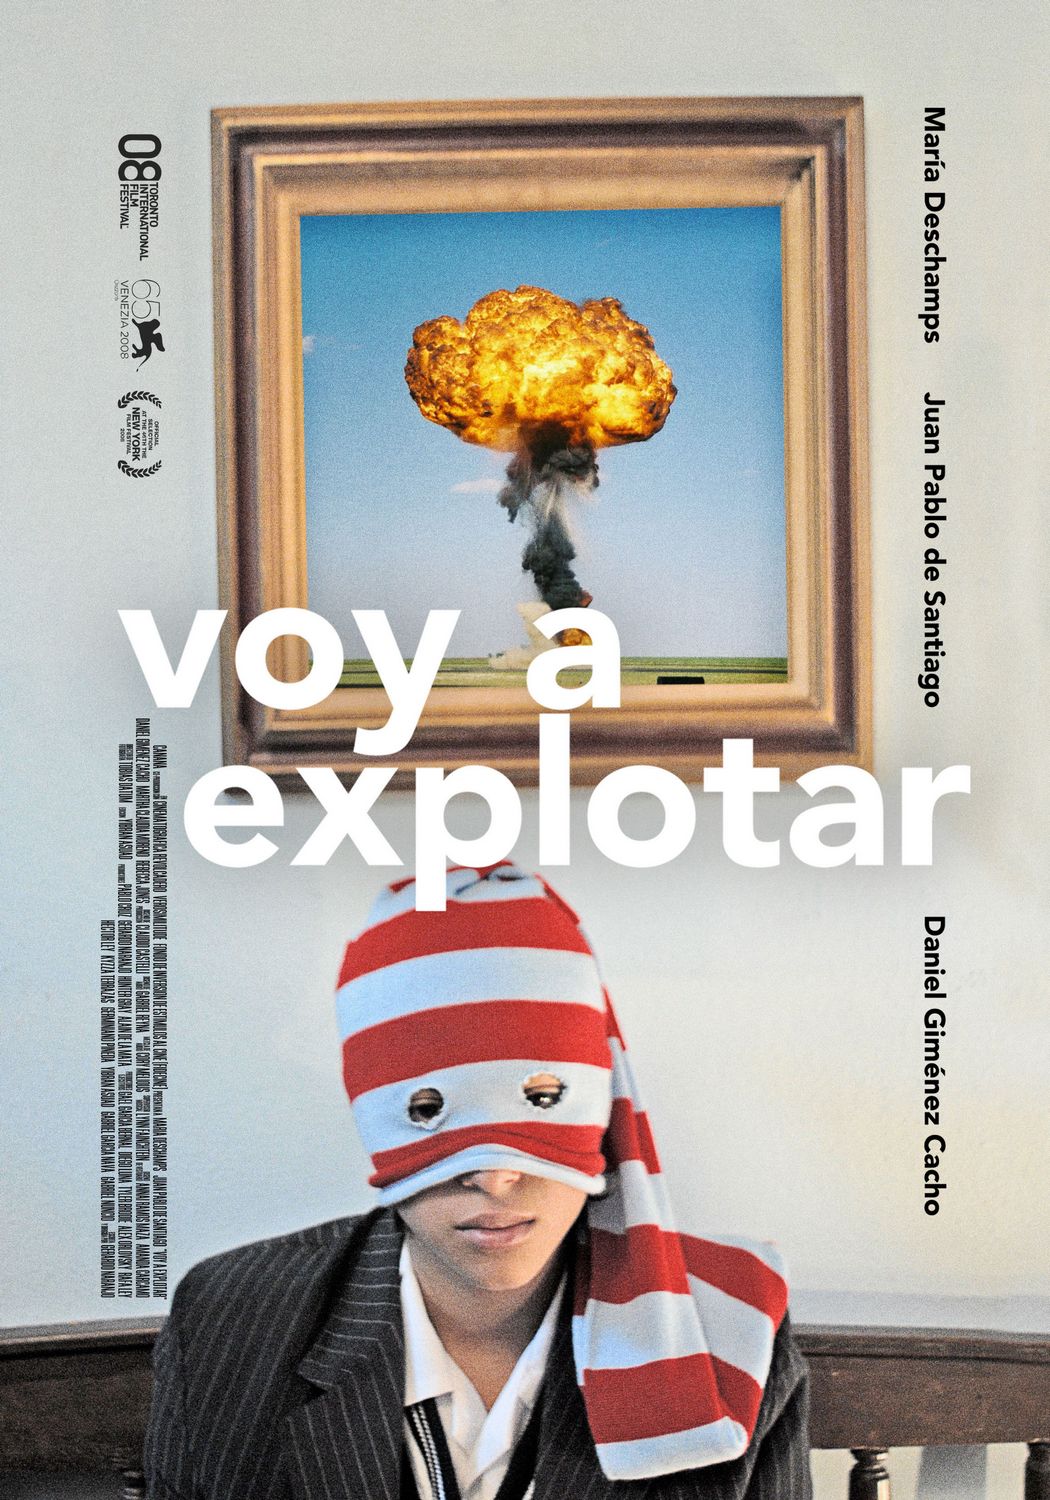 Extra Large Movie Poster Image for Voy a explotar (#3 of 5)